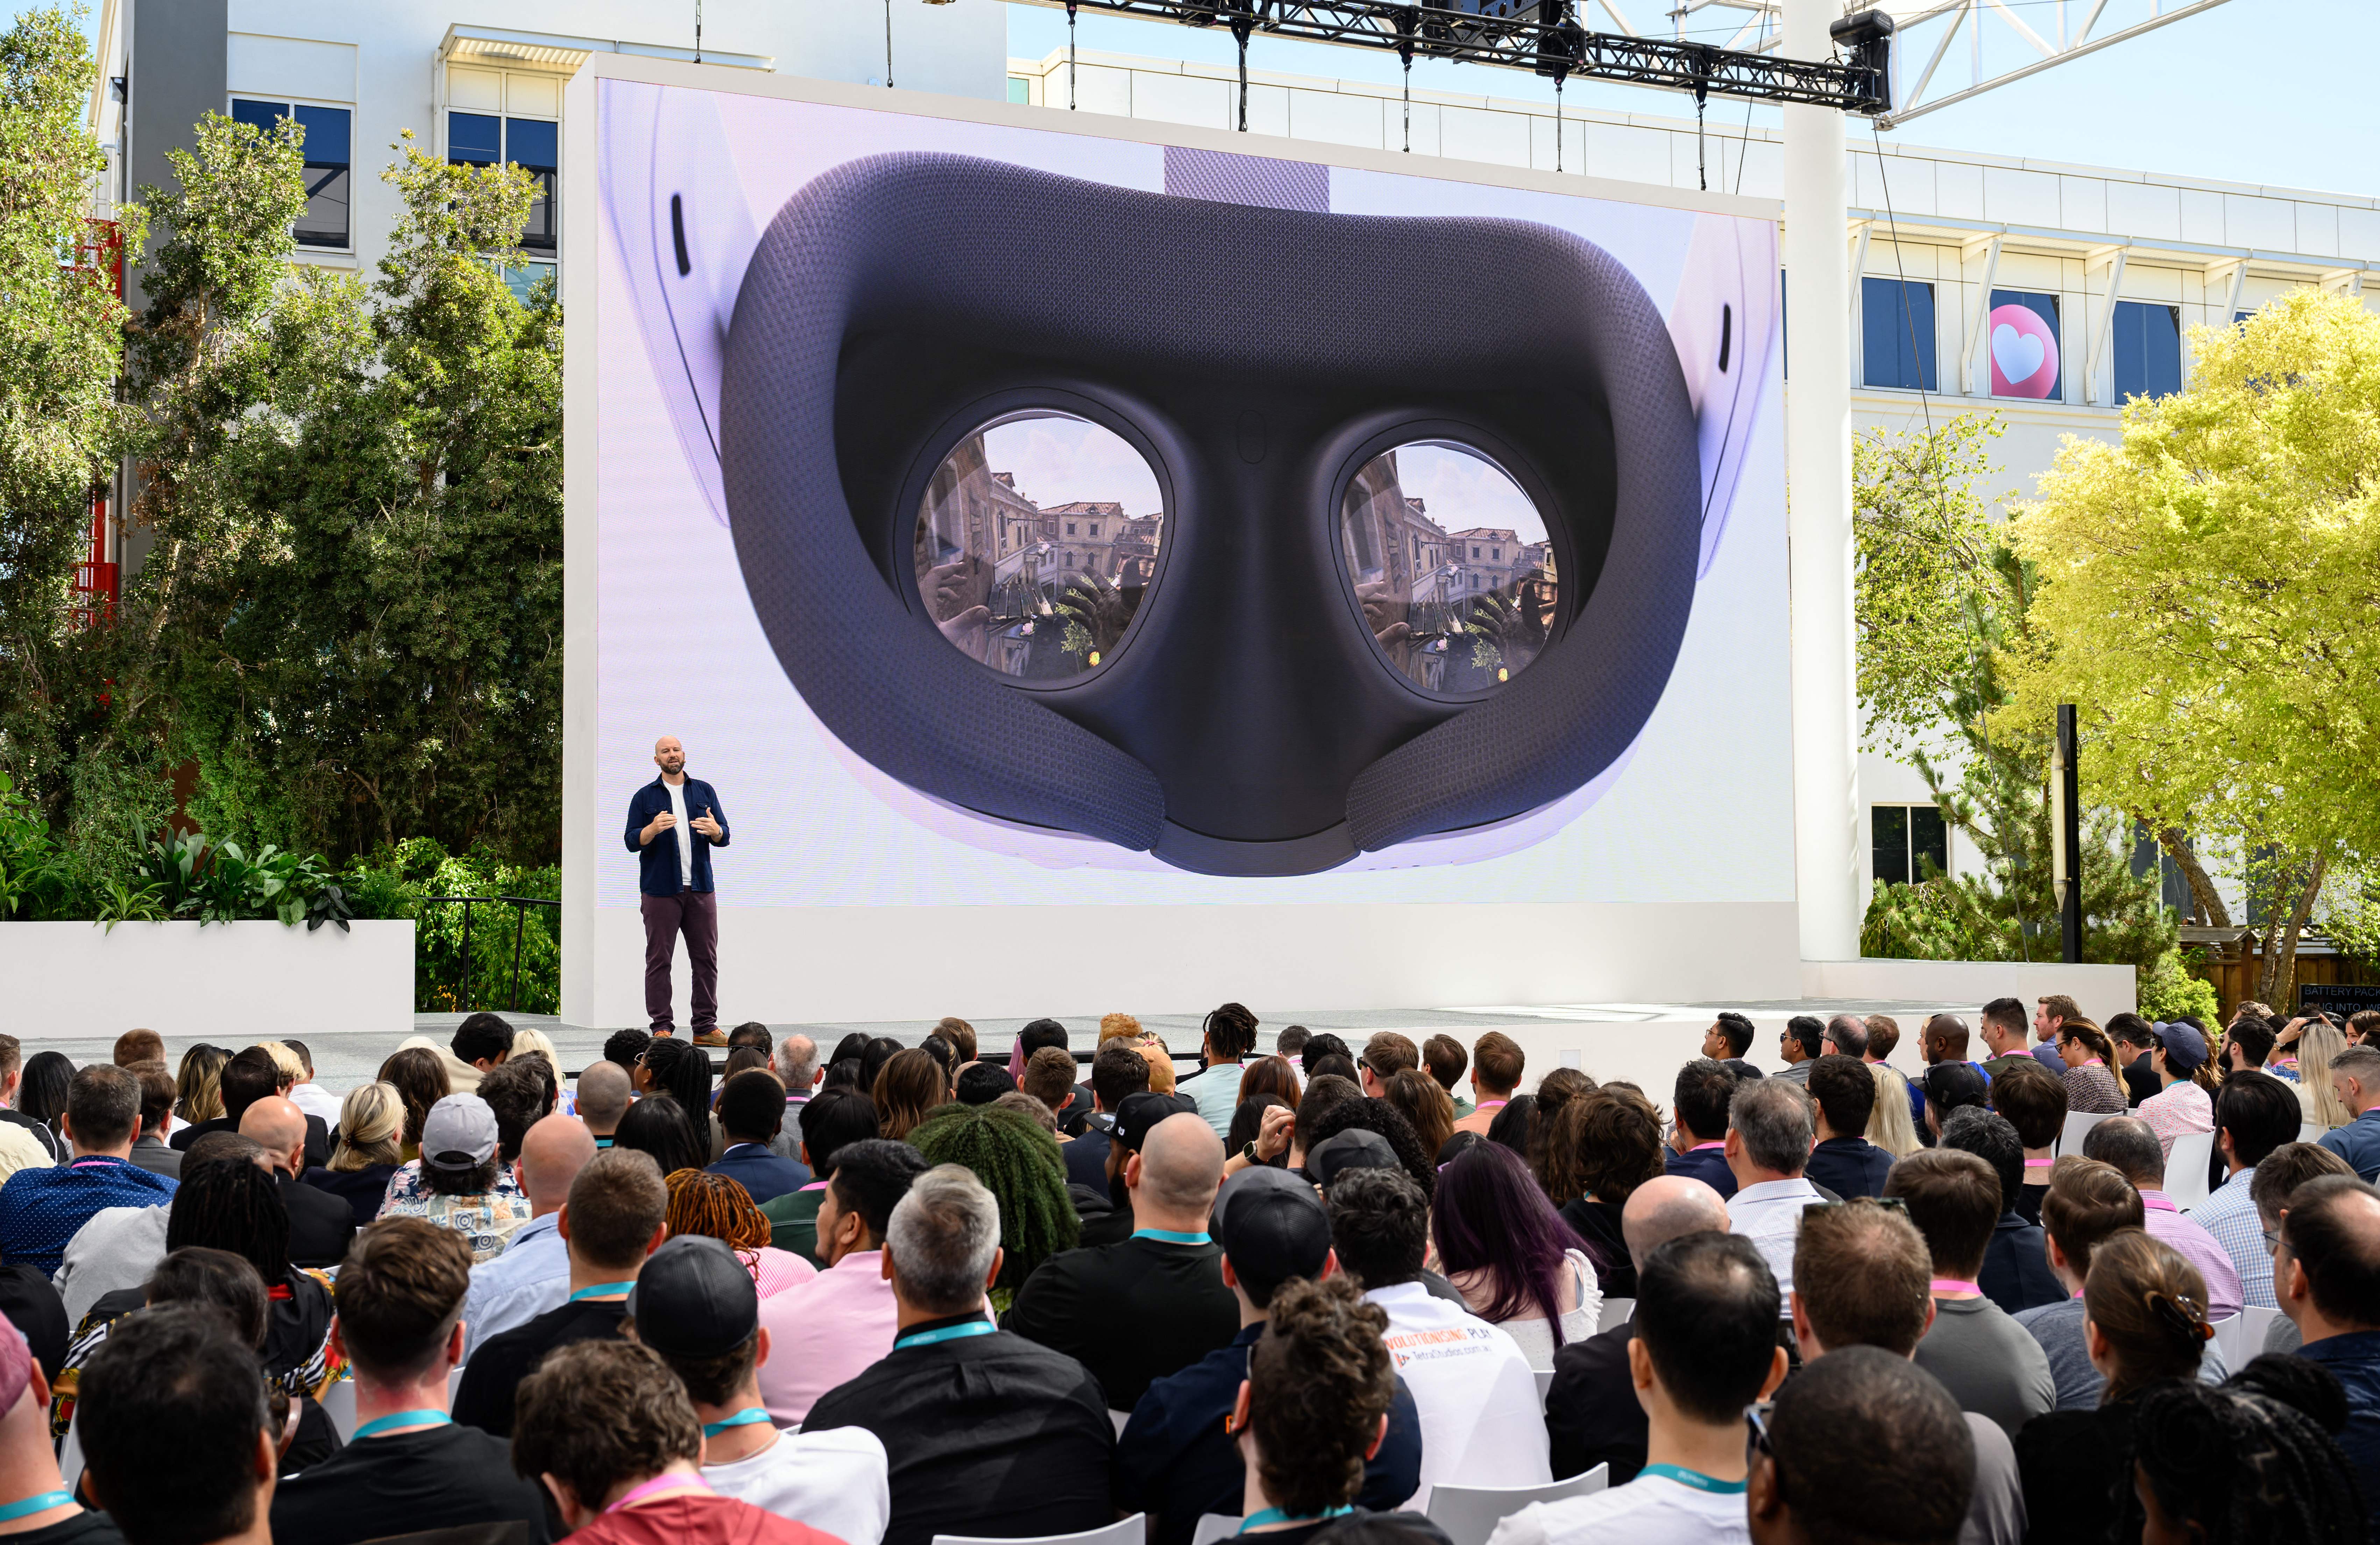 Meta thanks Apple for bringing more excitement to its virtual reality conference